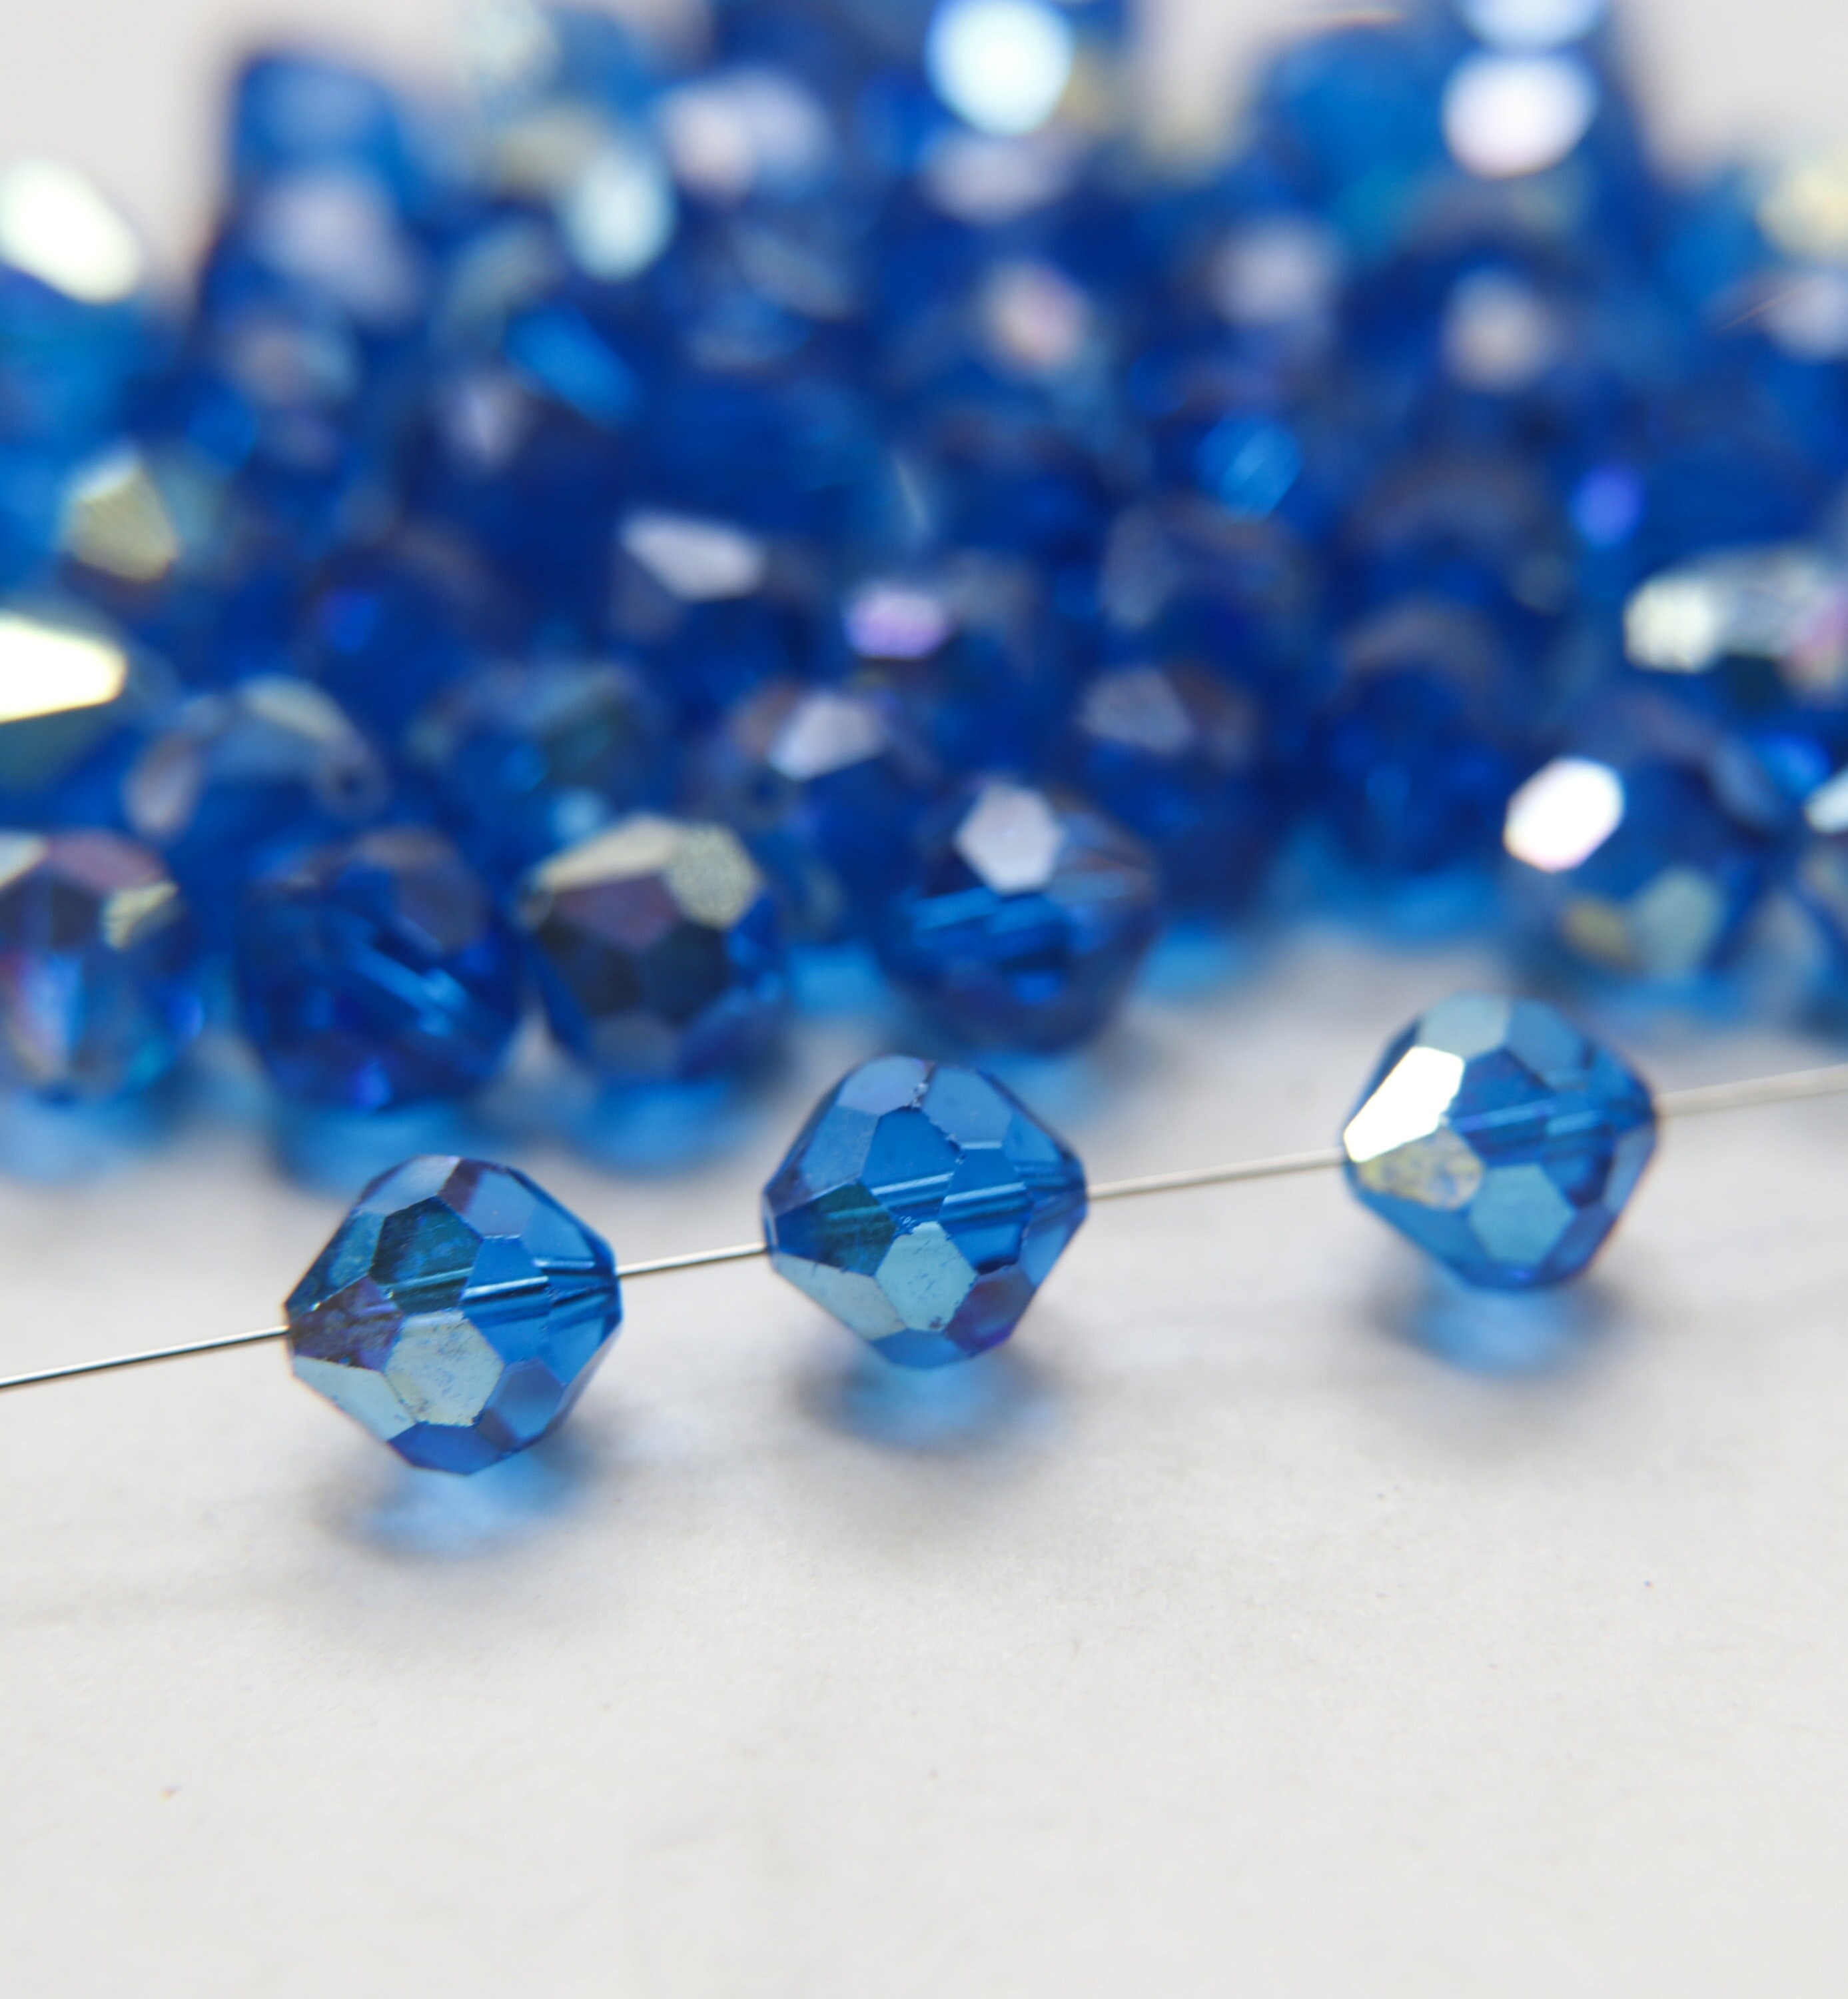 Swarovski Elements 8MM 5714 Star Beads in 4 Colors 6/12/24/72/144 Pieces  Wedding Decorations, Jewelry Supplies, Craft Supply 